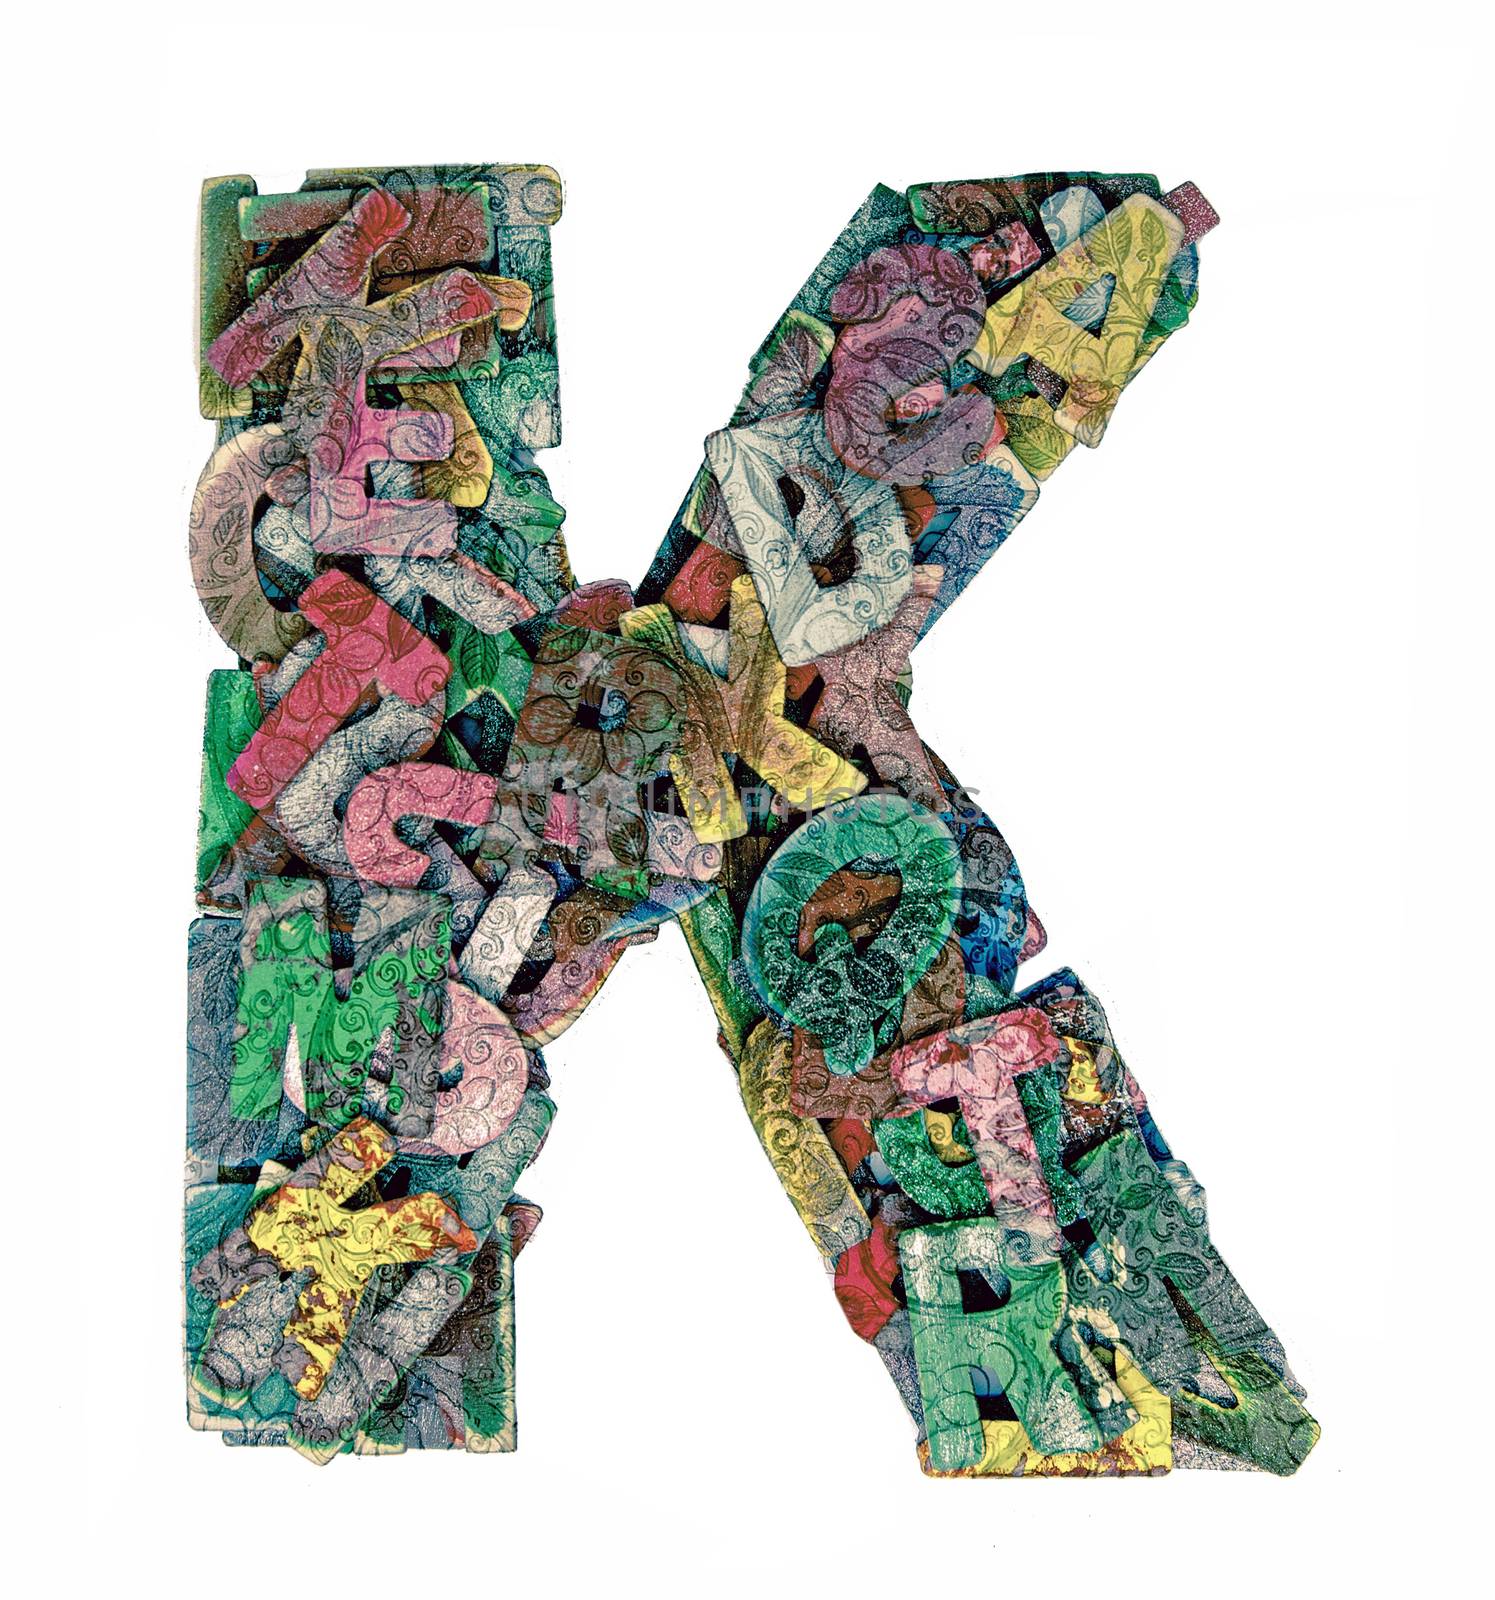 lots of small wooden letters to make up the letter K